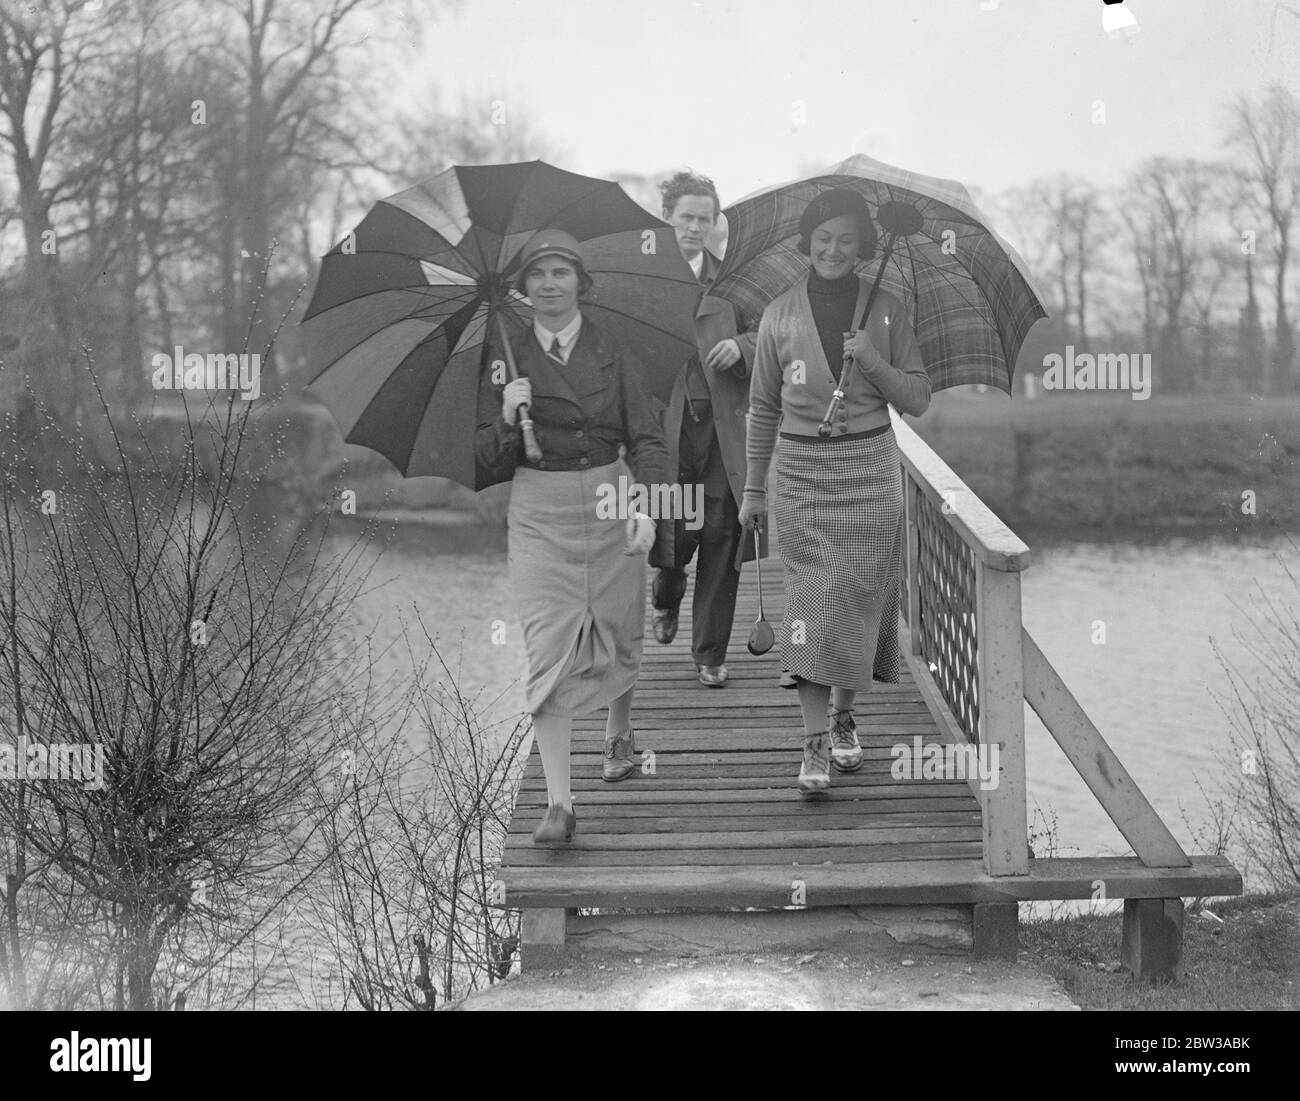 Women ' s international golf tournament opens in the rain at Ranelagh . The ladies golf union international tournament opened in the rain at the Ranelagh Club , Barnes . Photo shows Miss Eithne Penteny ( left ) and Miss B Gaysford , crossing the bridge beneath umbrellas . 11 April 1934 Stock Photo